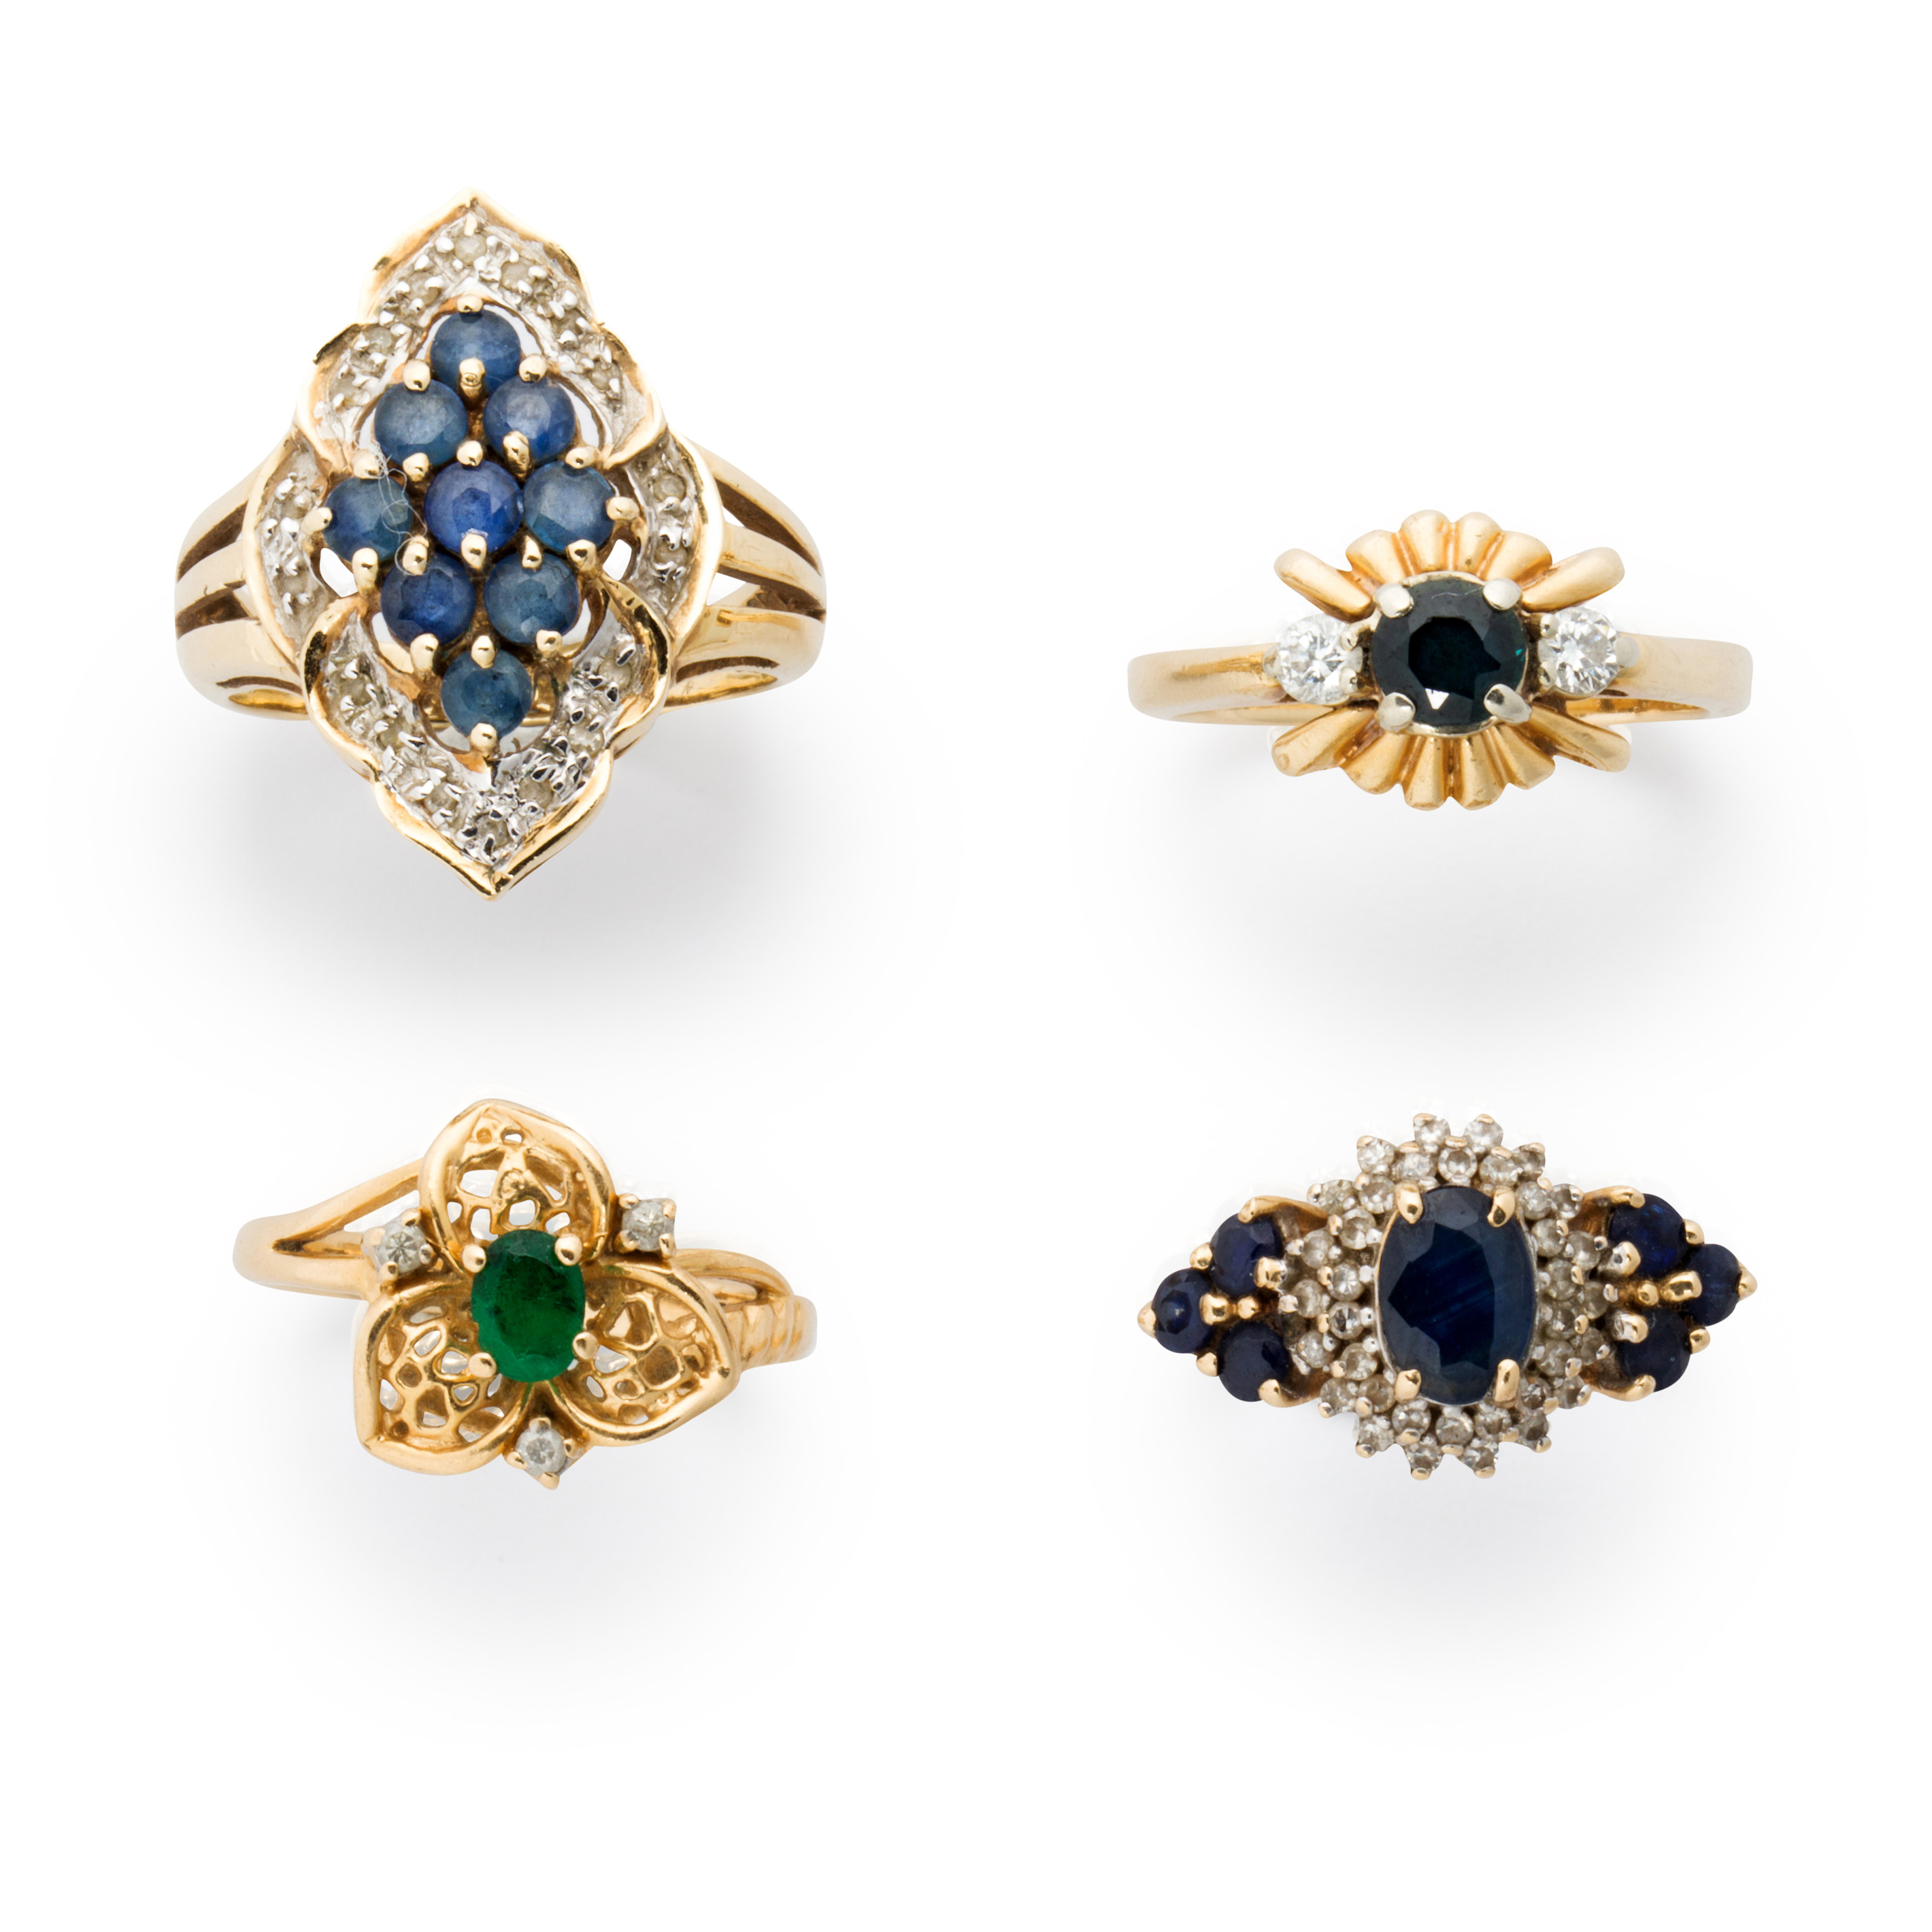 A GROUP OF GEMSTONE AND GOLD RINGS 3a41c0